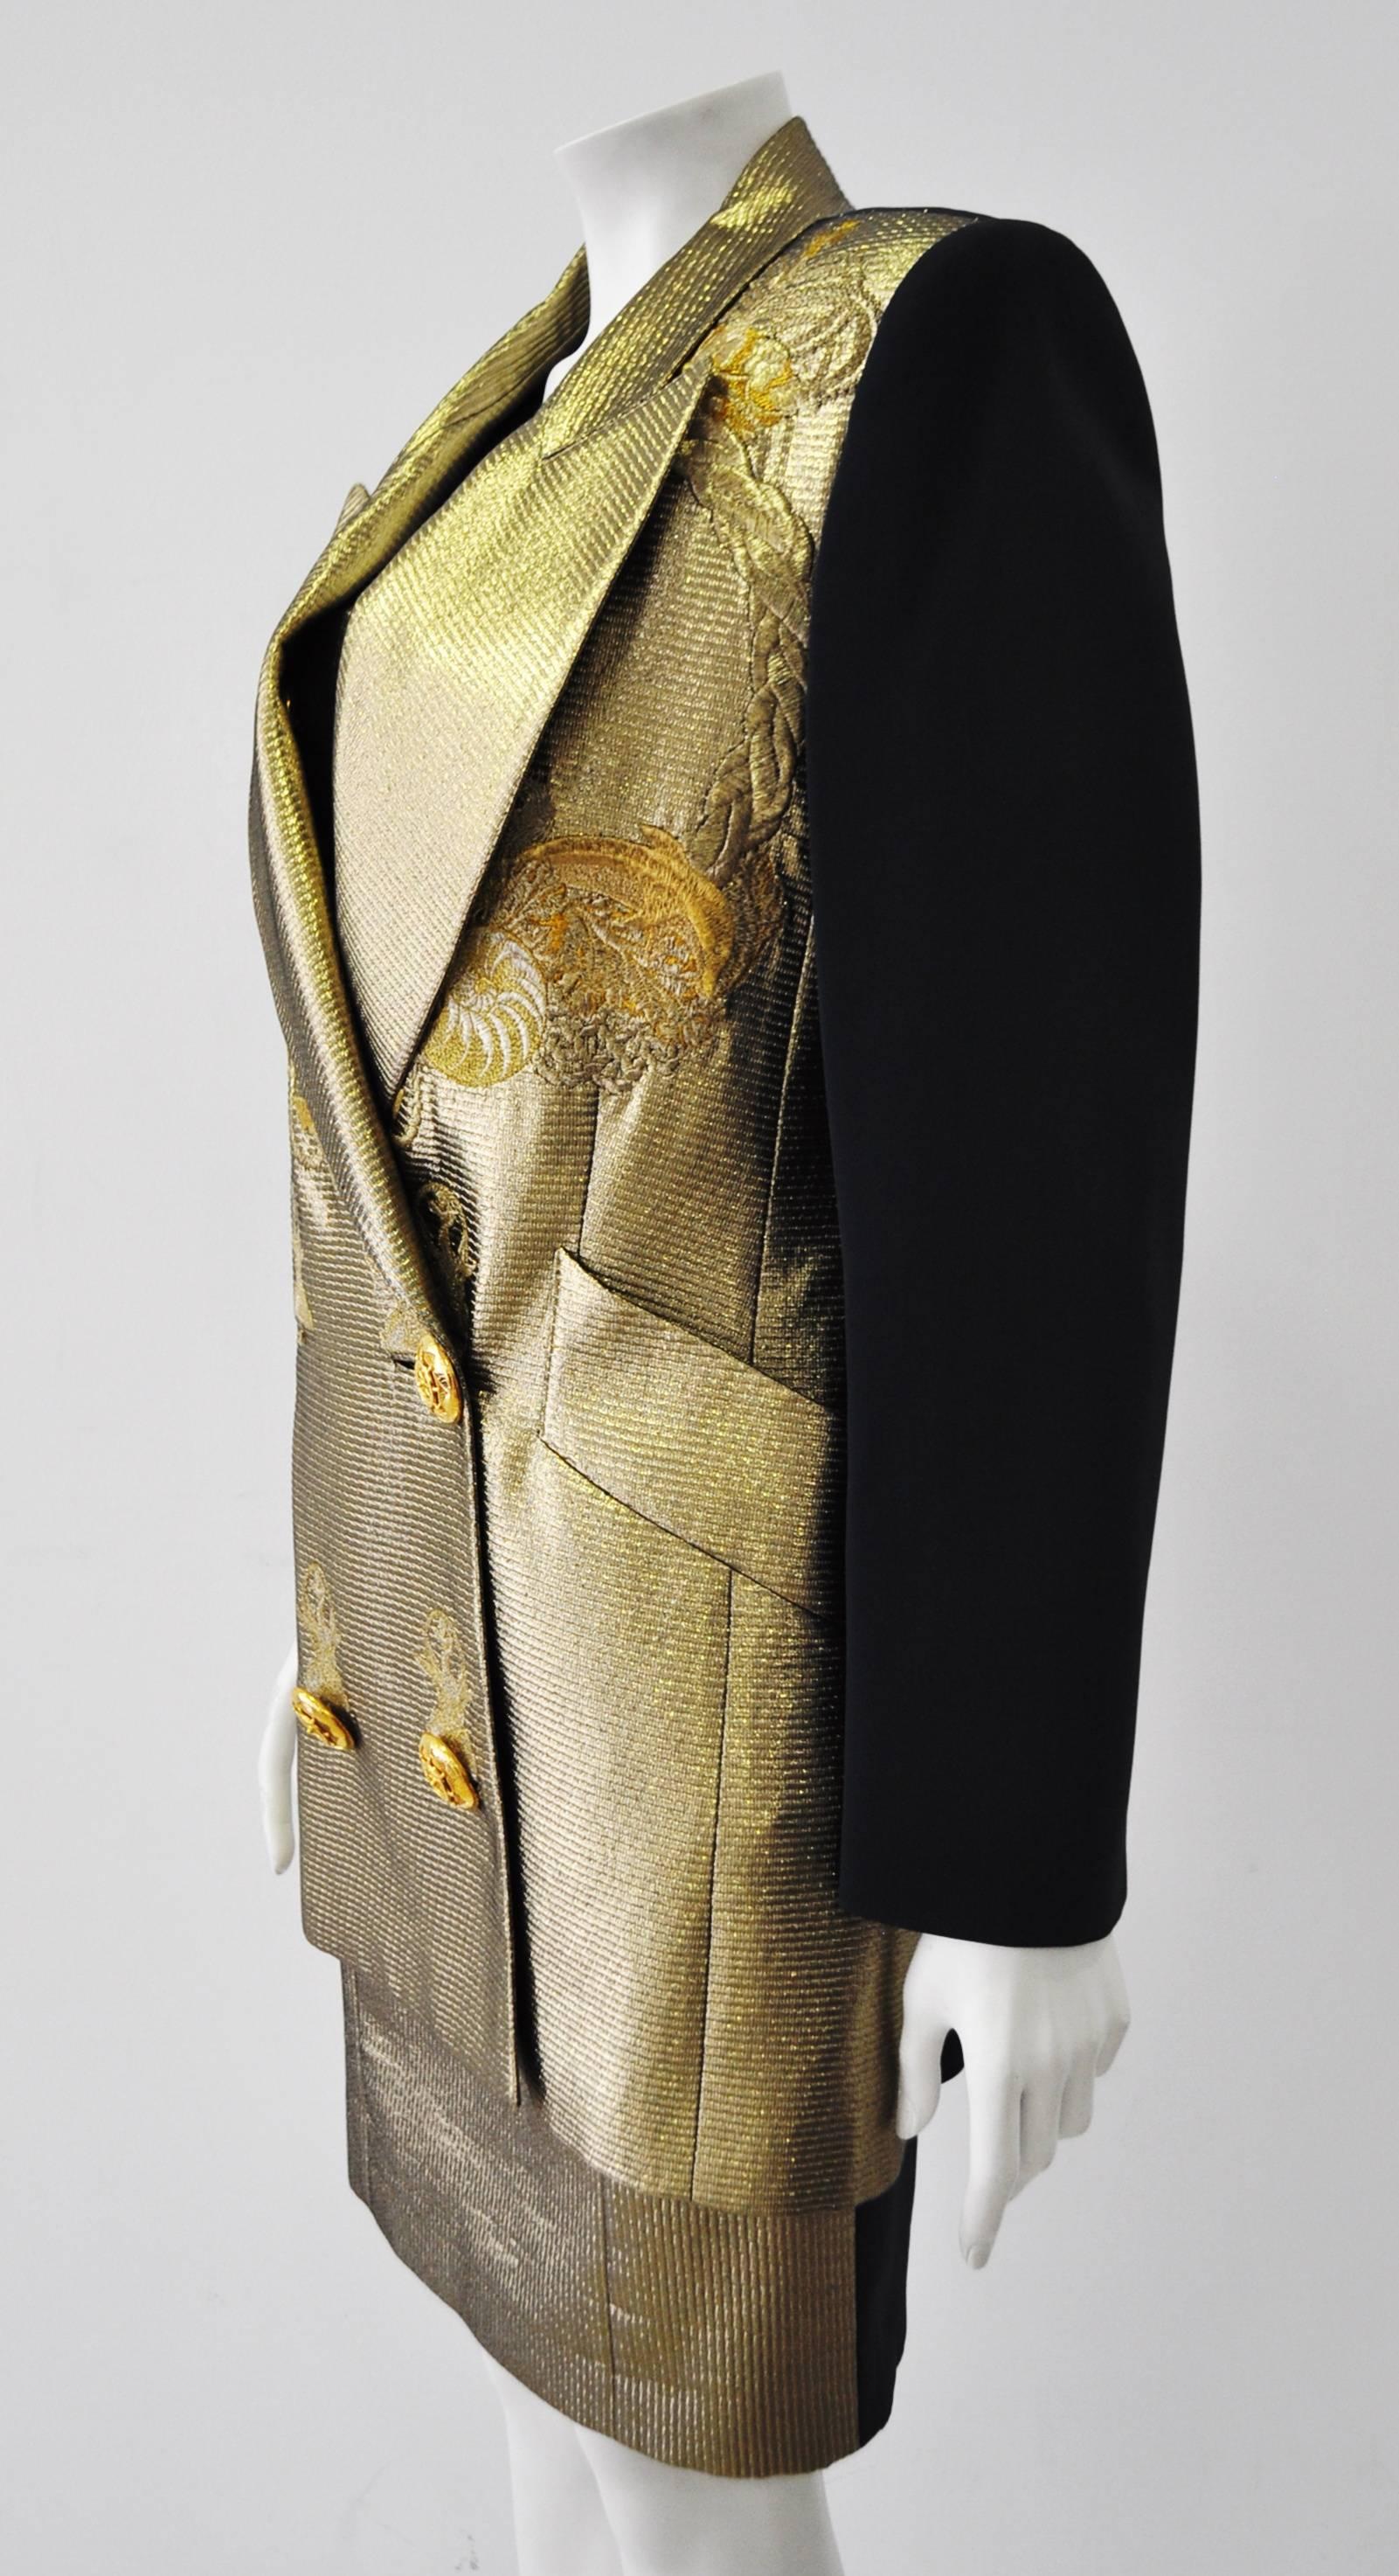 Unique Gianfranco Ferre Dress And Coat Ensemble 1990's. Gold Colour Has A Universality, It Is A Classic Addition To The Autumn And Winter Wardrobe.  An Outstanding Piece With Two Different Colours Gold In Front And Navy Blue Back Featuring Gold